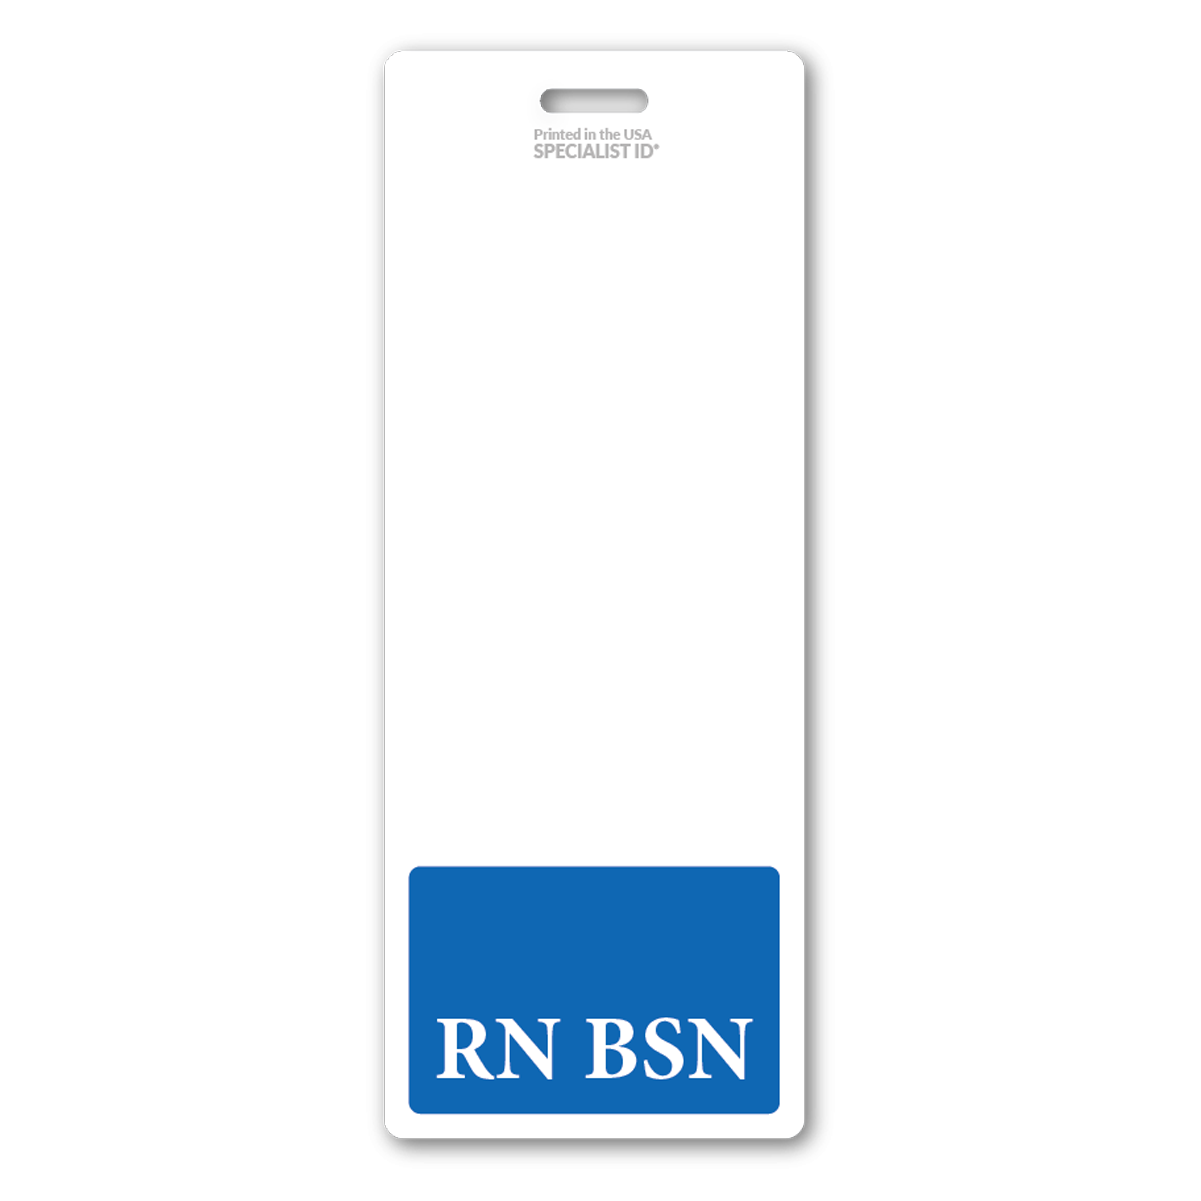 Oversized RN BSN Badge Buddy - Extra Long ID Badge Buddy for Registered Nurses with a Bachelors of Science in Nursing, framed in a Blue Border